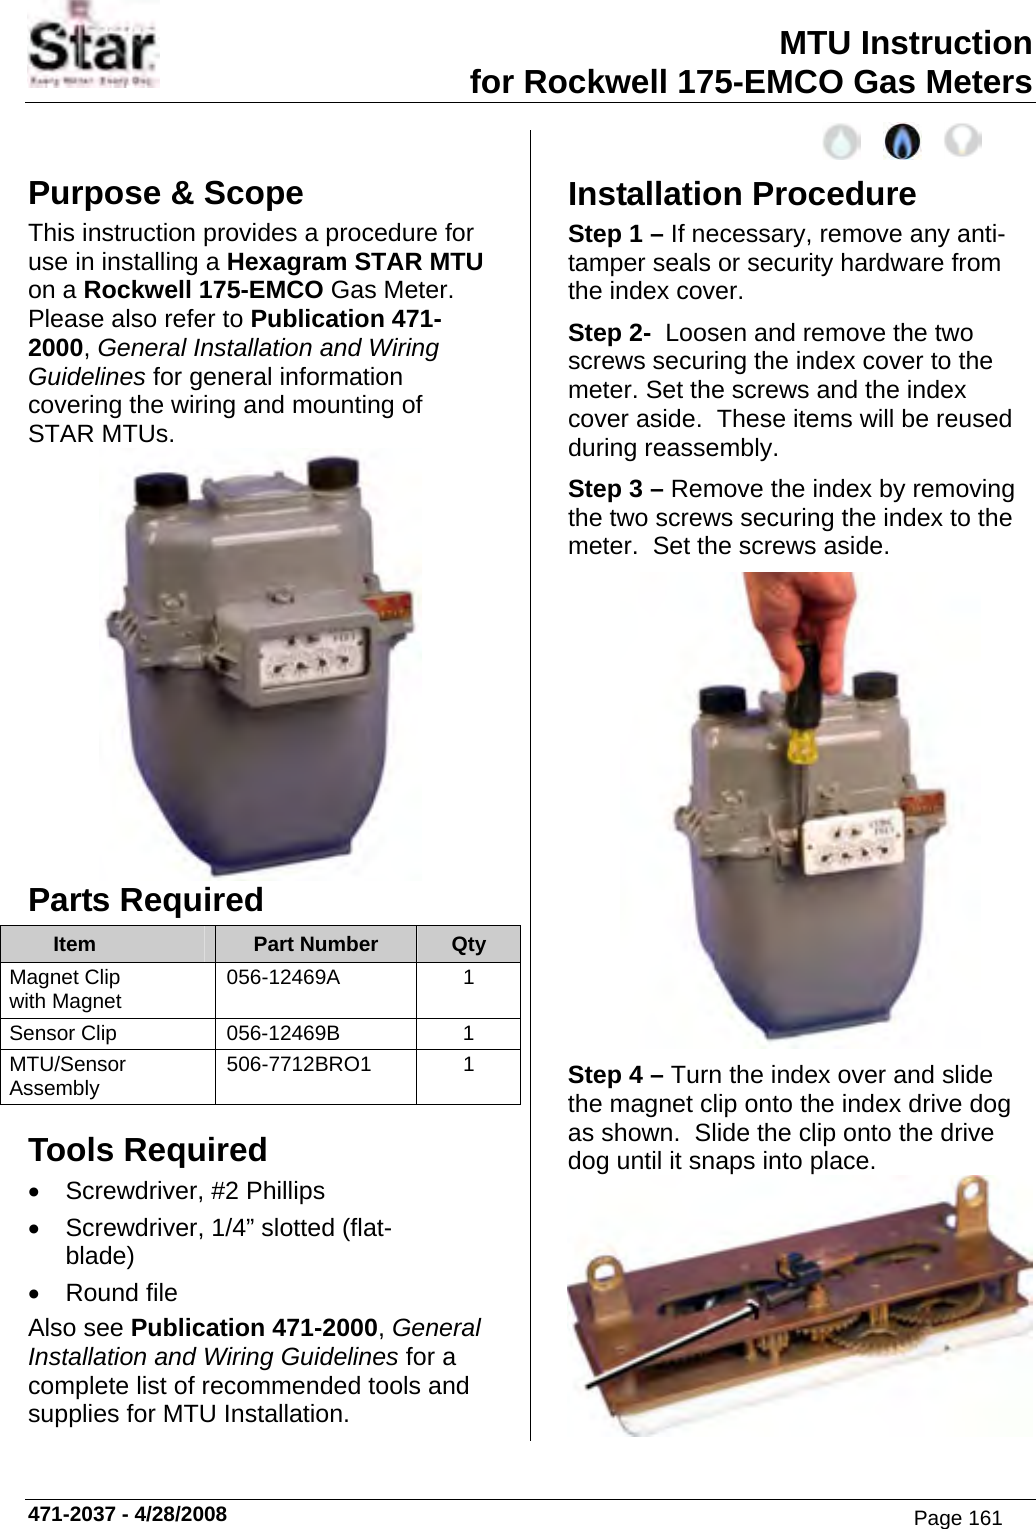 MTU Instruction for Rockwell 175-EMCO Gas Meters Purpose &amp; Scope This instruction provides a procedure for use in installing a Hexagram STAR MTU on a Rockwell 175-EMCO Gas Meter.  Please also refer to Publication 471-2000, General Installation and Wiring Guidelines for general information covering the wiring and mounting of STAR MTUs.  Parts Required Item  Part Number  Qty Magnet Clip with Magnet  056-12469A 1 Sensor Clip  056-12469B  1 MTU/Sensor Assembly 506-7712BRO1 1 Tools Required •  Screwdriver, #2 Phillips •  Screwdriver, 1/4” slotted (flat-blade) • Round file Also see Publication 471-2000, General Installation and Wiring Guidelines for a complete list of recommended tools and supplies for MTU Installation.  Installation Procedure Step 1 – If necessary, remove any anti-tamper seals or security hardware from the index cover. Step 2-  Loosen and remove the two screws securing the index cover to the meter. Set the screws and the index cover aside.  These items will be reused during reassembly. Step 3 – Remove the index by removing the two screws securing the index to the meter.  Set the screws aside.  Step 4 – Turn the index over and slide the magnet clip onto the index drive dog as shown.  Slide the clip onto the drive dog until it snaps into place.  471-2037 - 4/28/2008 Page 161